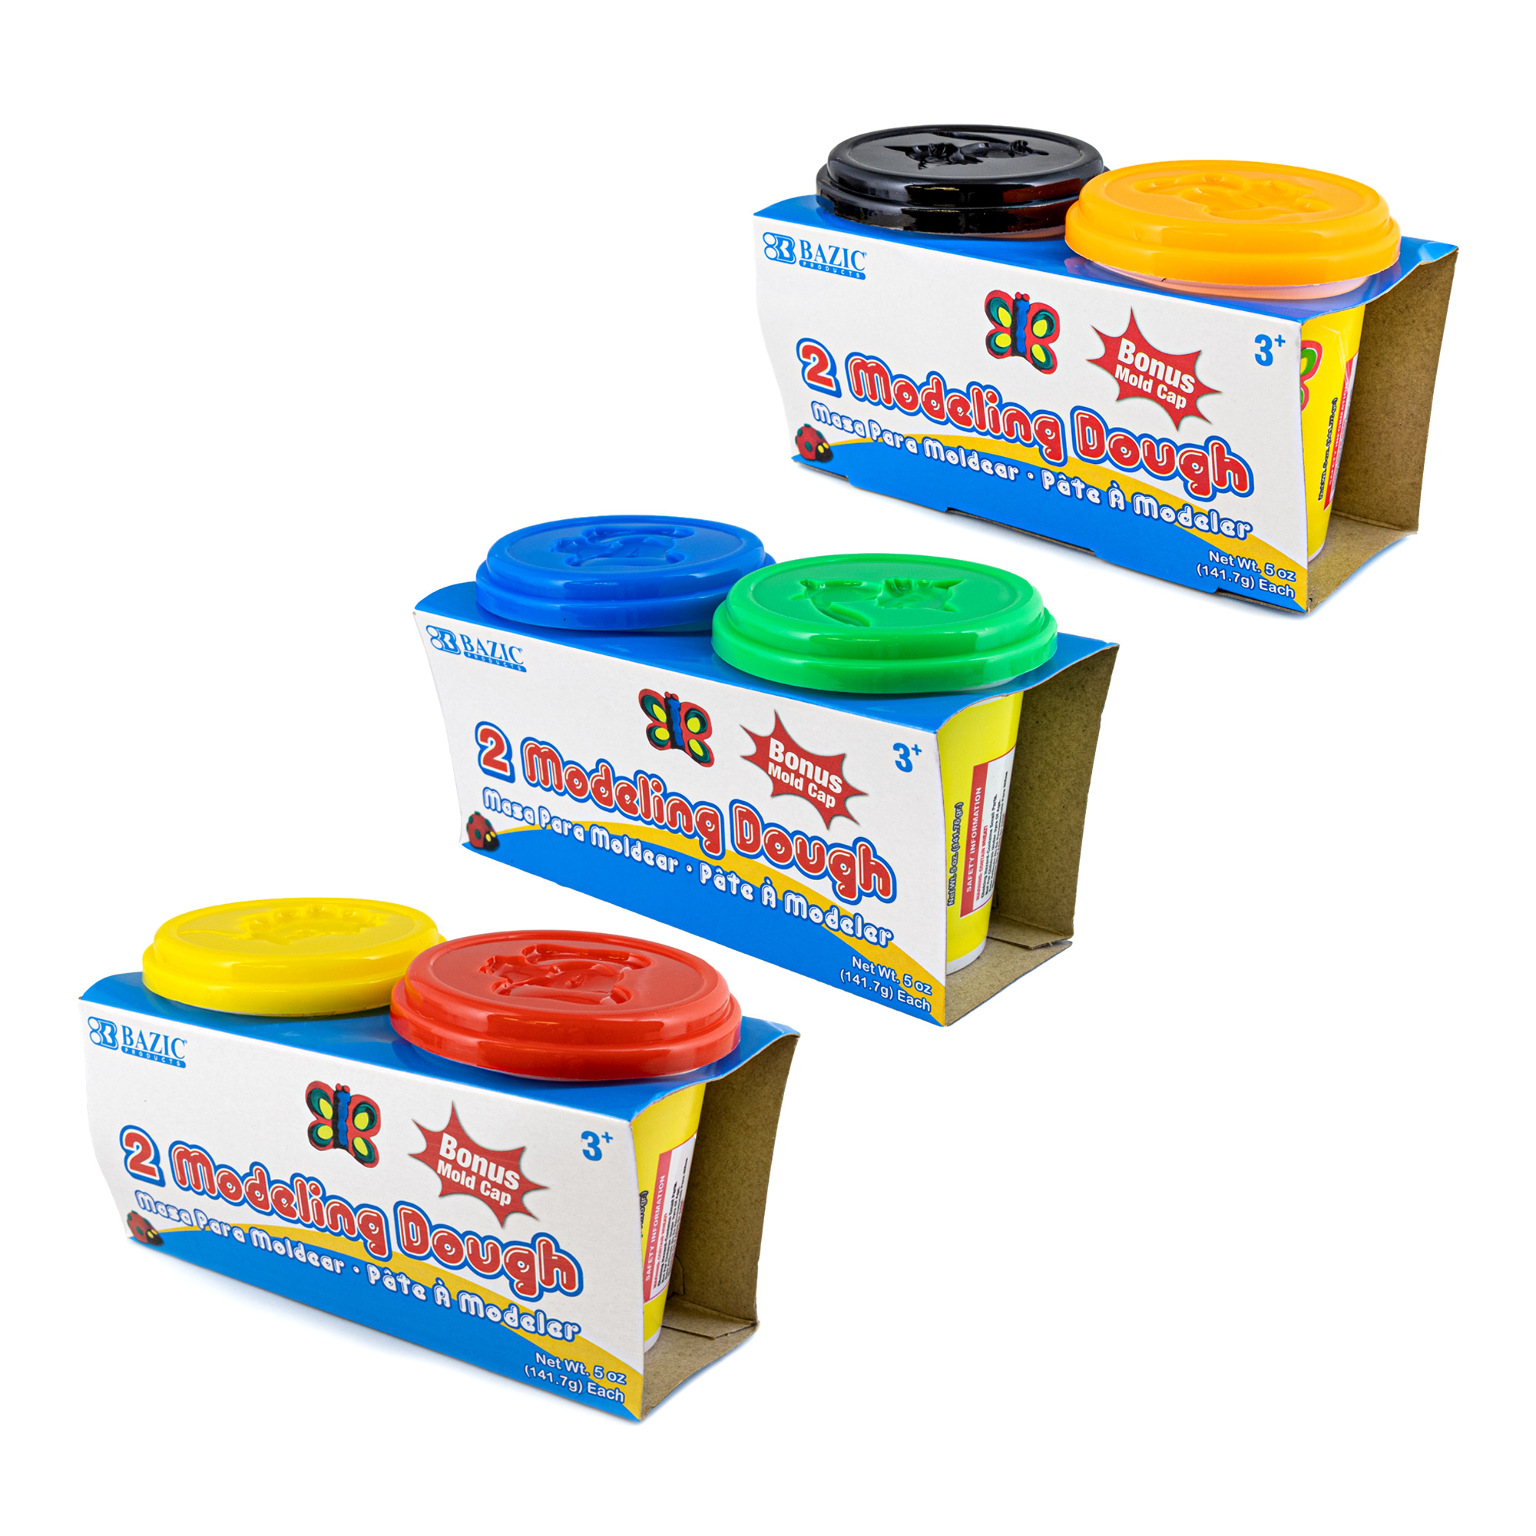 Play Doh 4 ounce can assorted colors